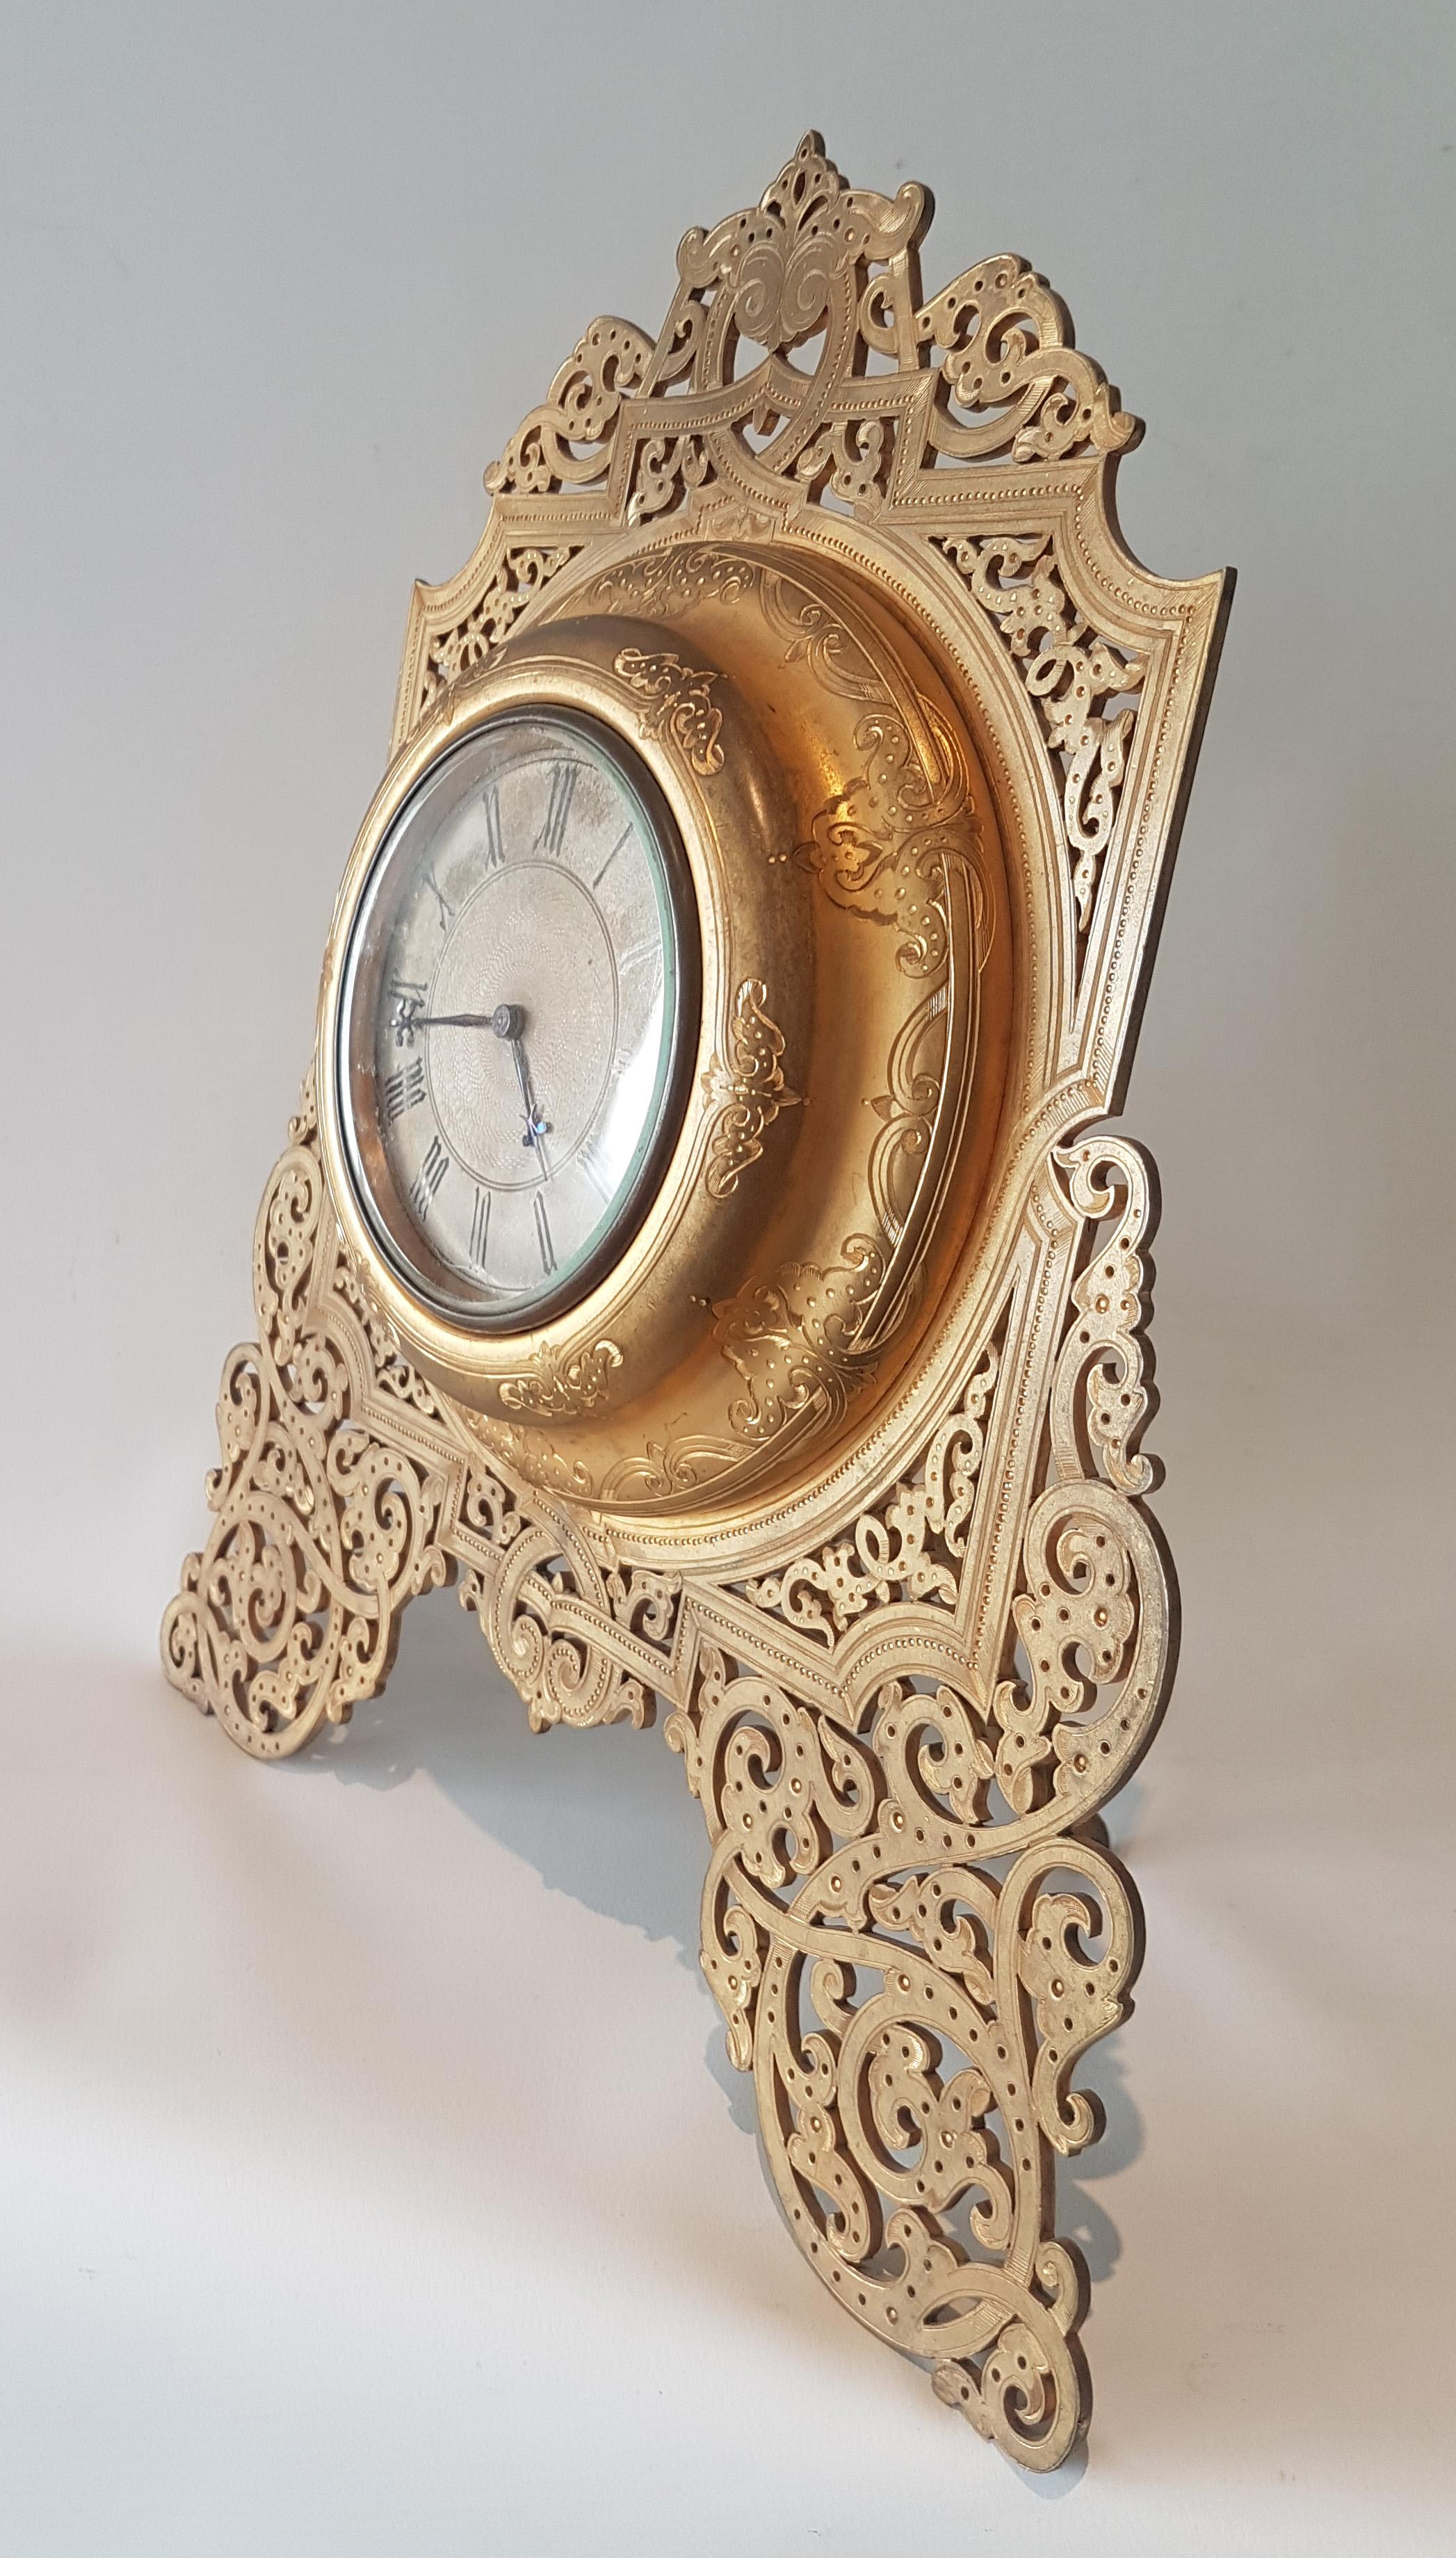 Large beautifully cut and engraved ormolu English Victorian strut clock in the manner of Cole. Silvered dial with engine turned centre with beautifully cut blued steel hands. 8 day lever movement.